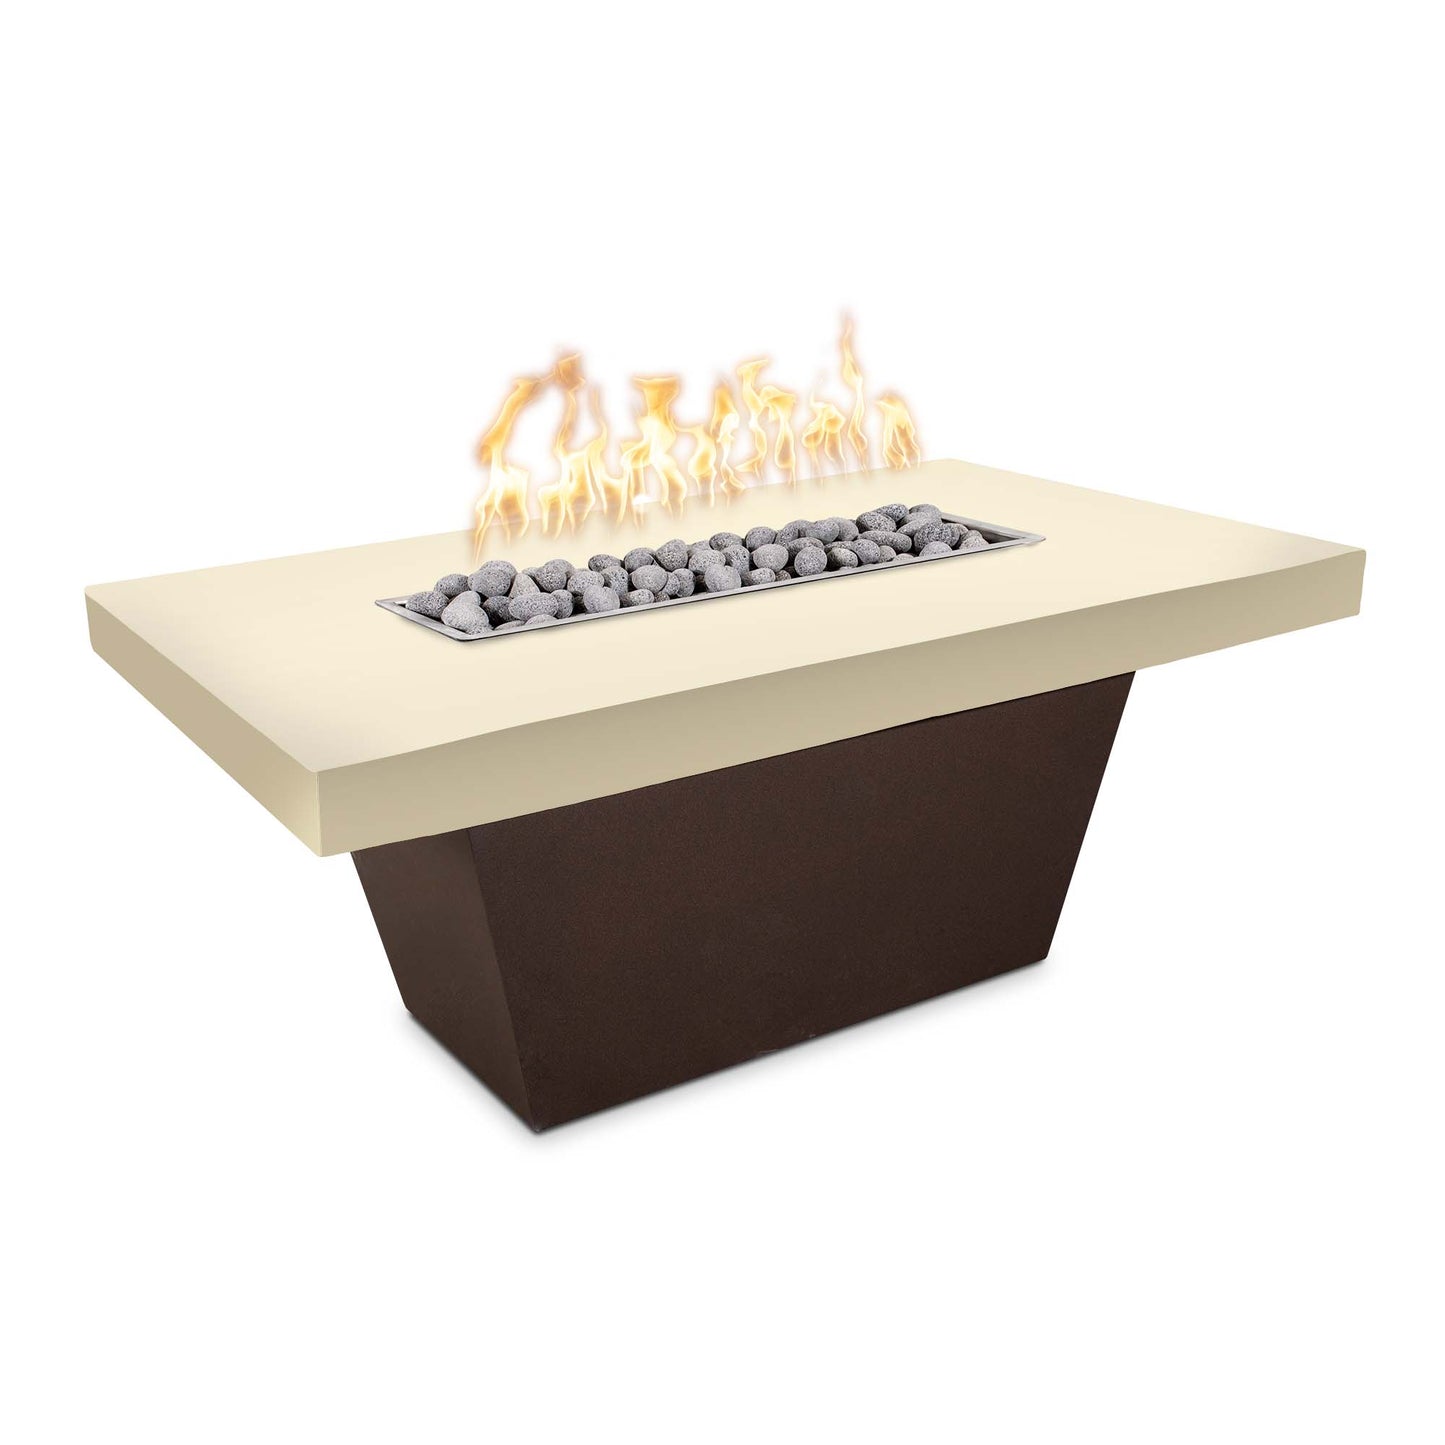 The Outdoor Plus Tacoma 48" Metallic Pearl Concrete Top & Copper Vein Powder Coated Base Natural Gas Fire Table with Match Lit Ignition